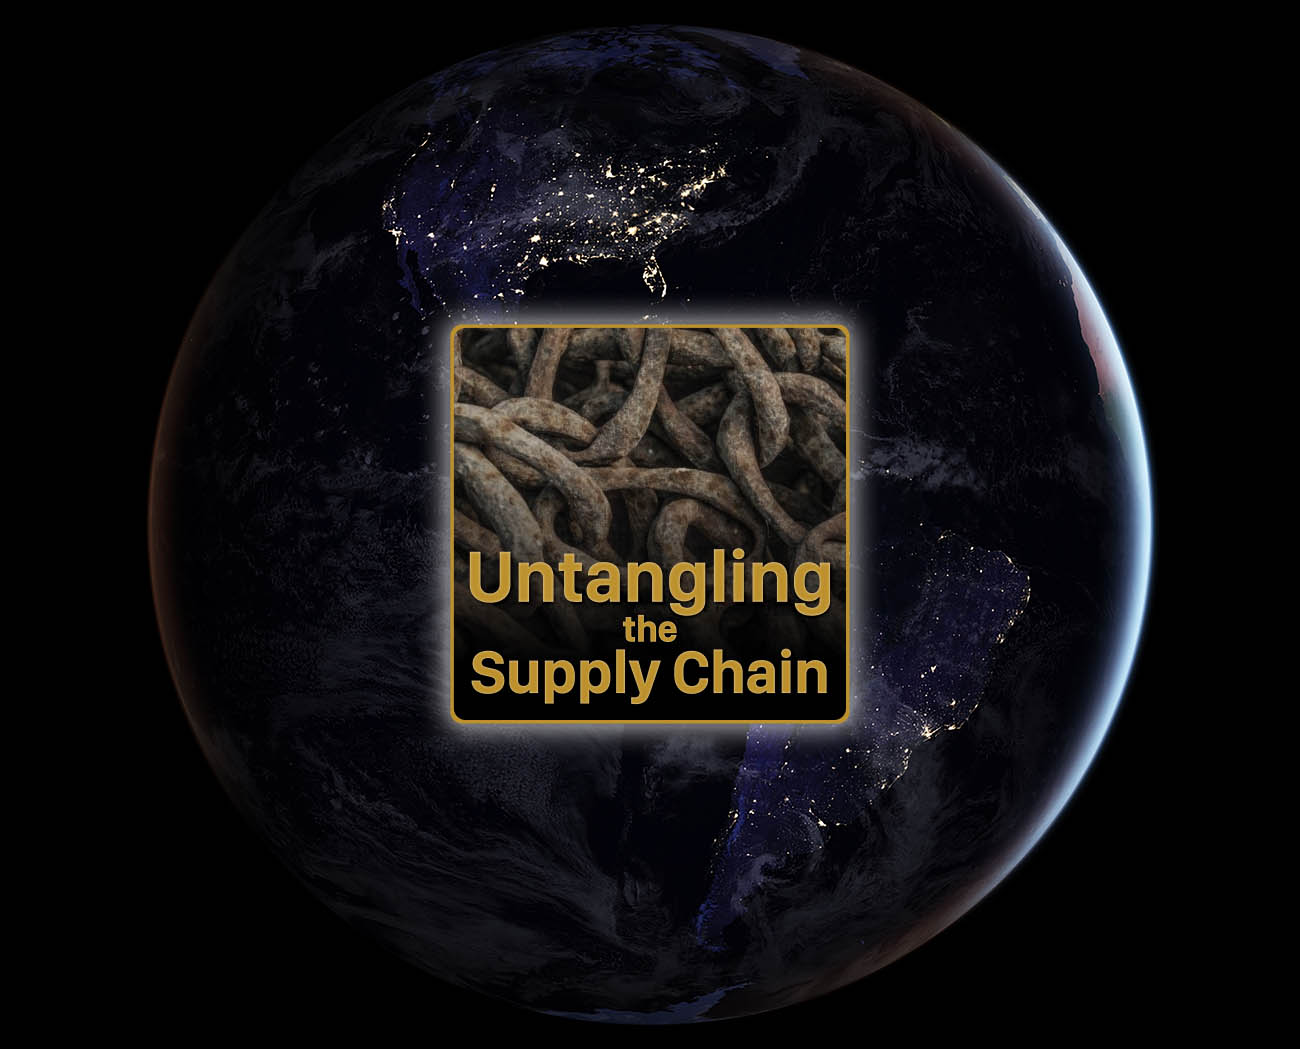 Untangling the Supply Chain